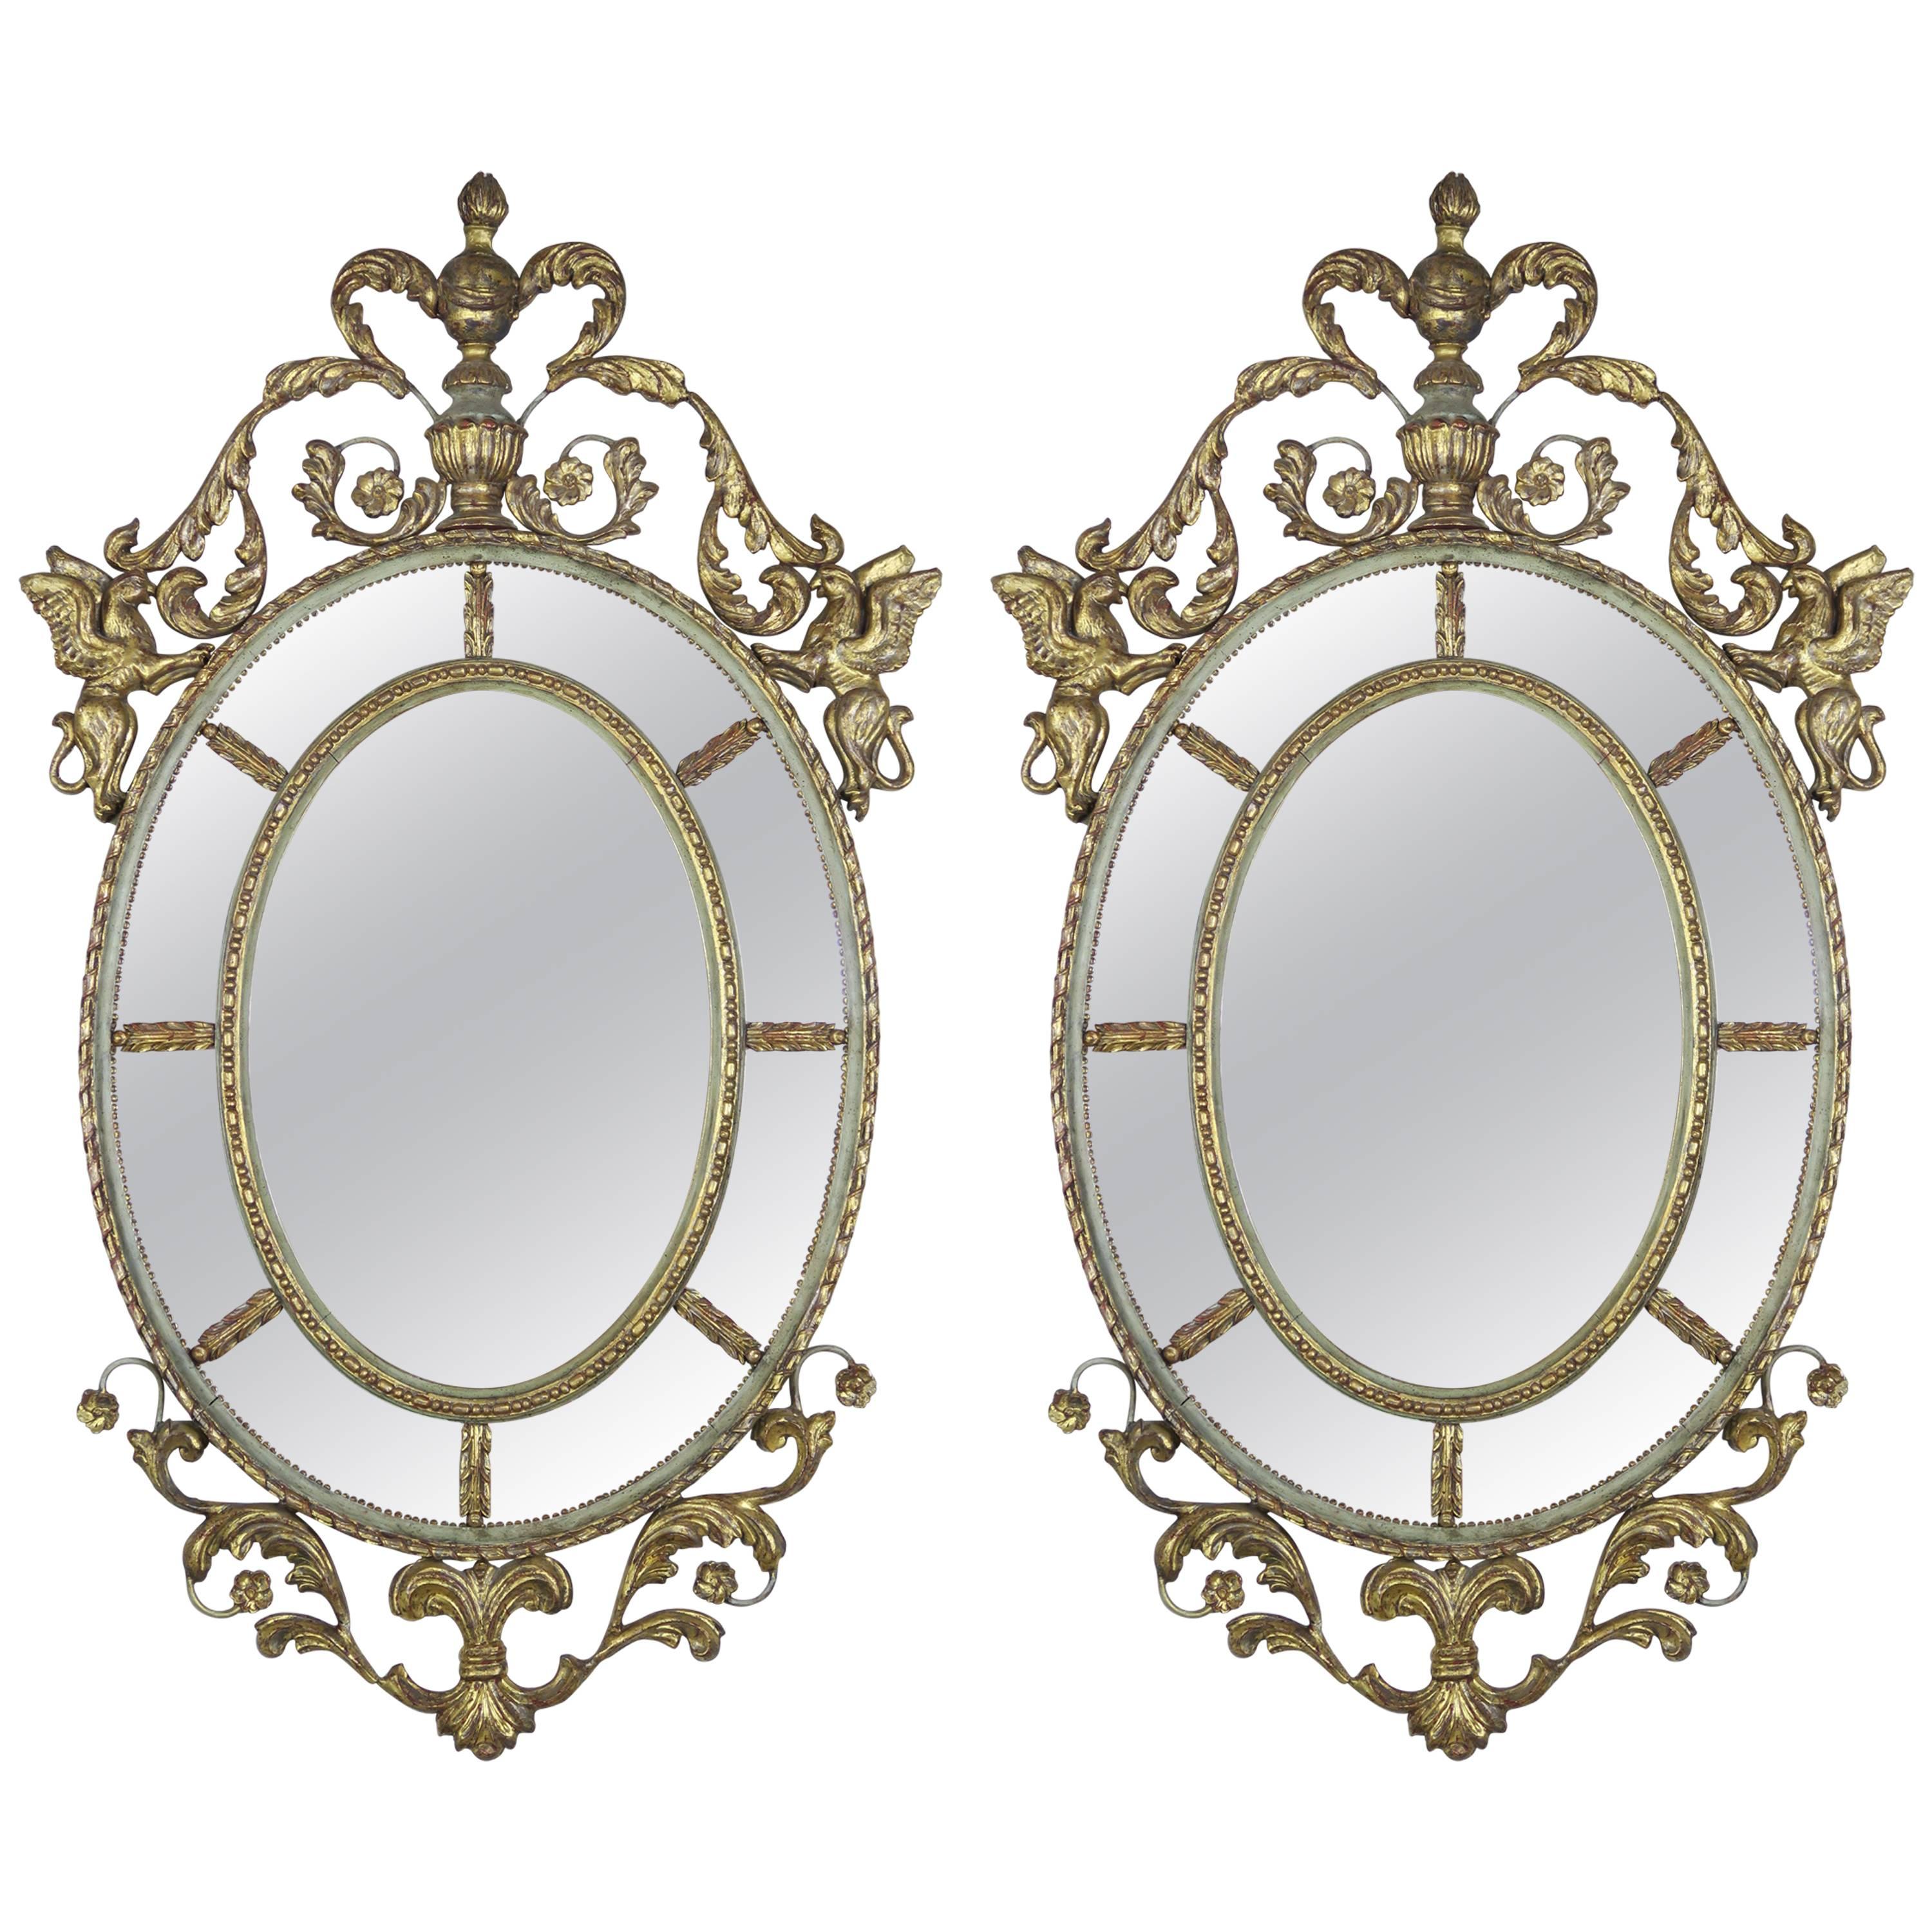 Pair of French Rococo Style Painted and Gold Leaf Mirrors